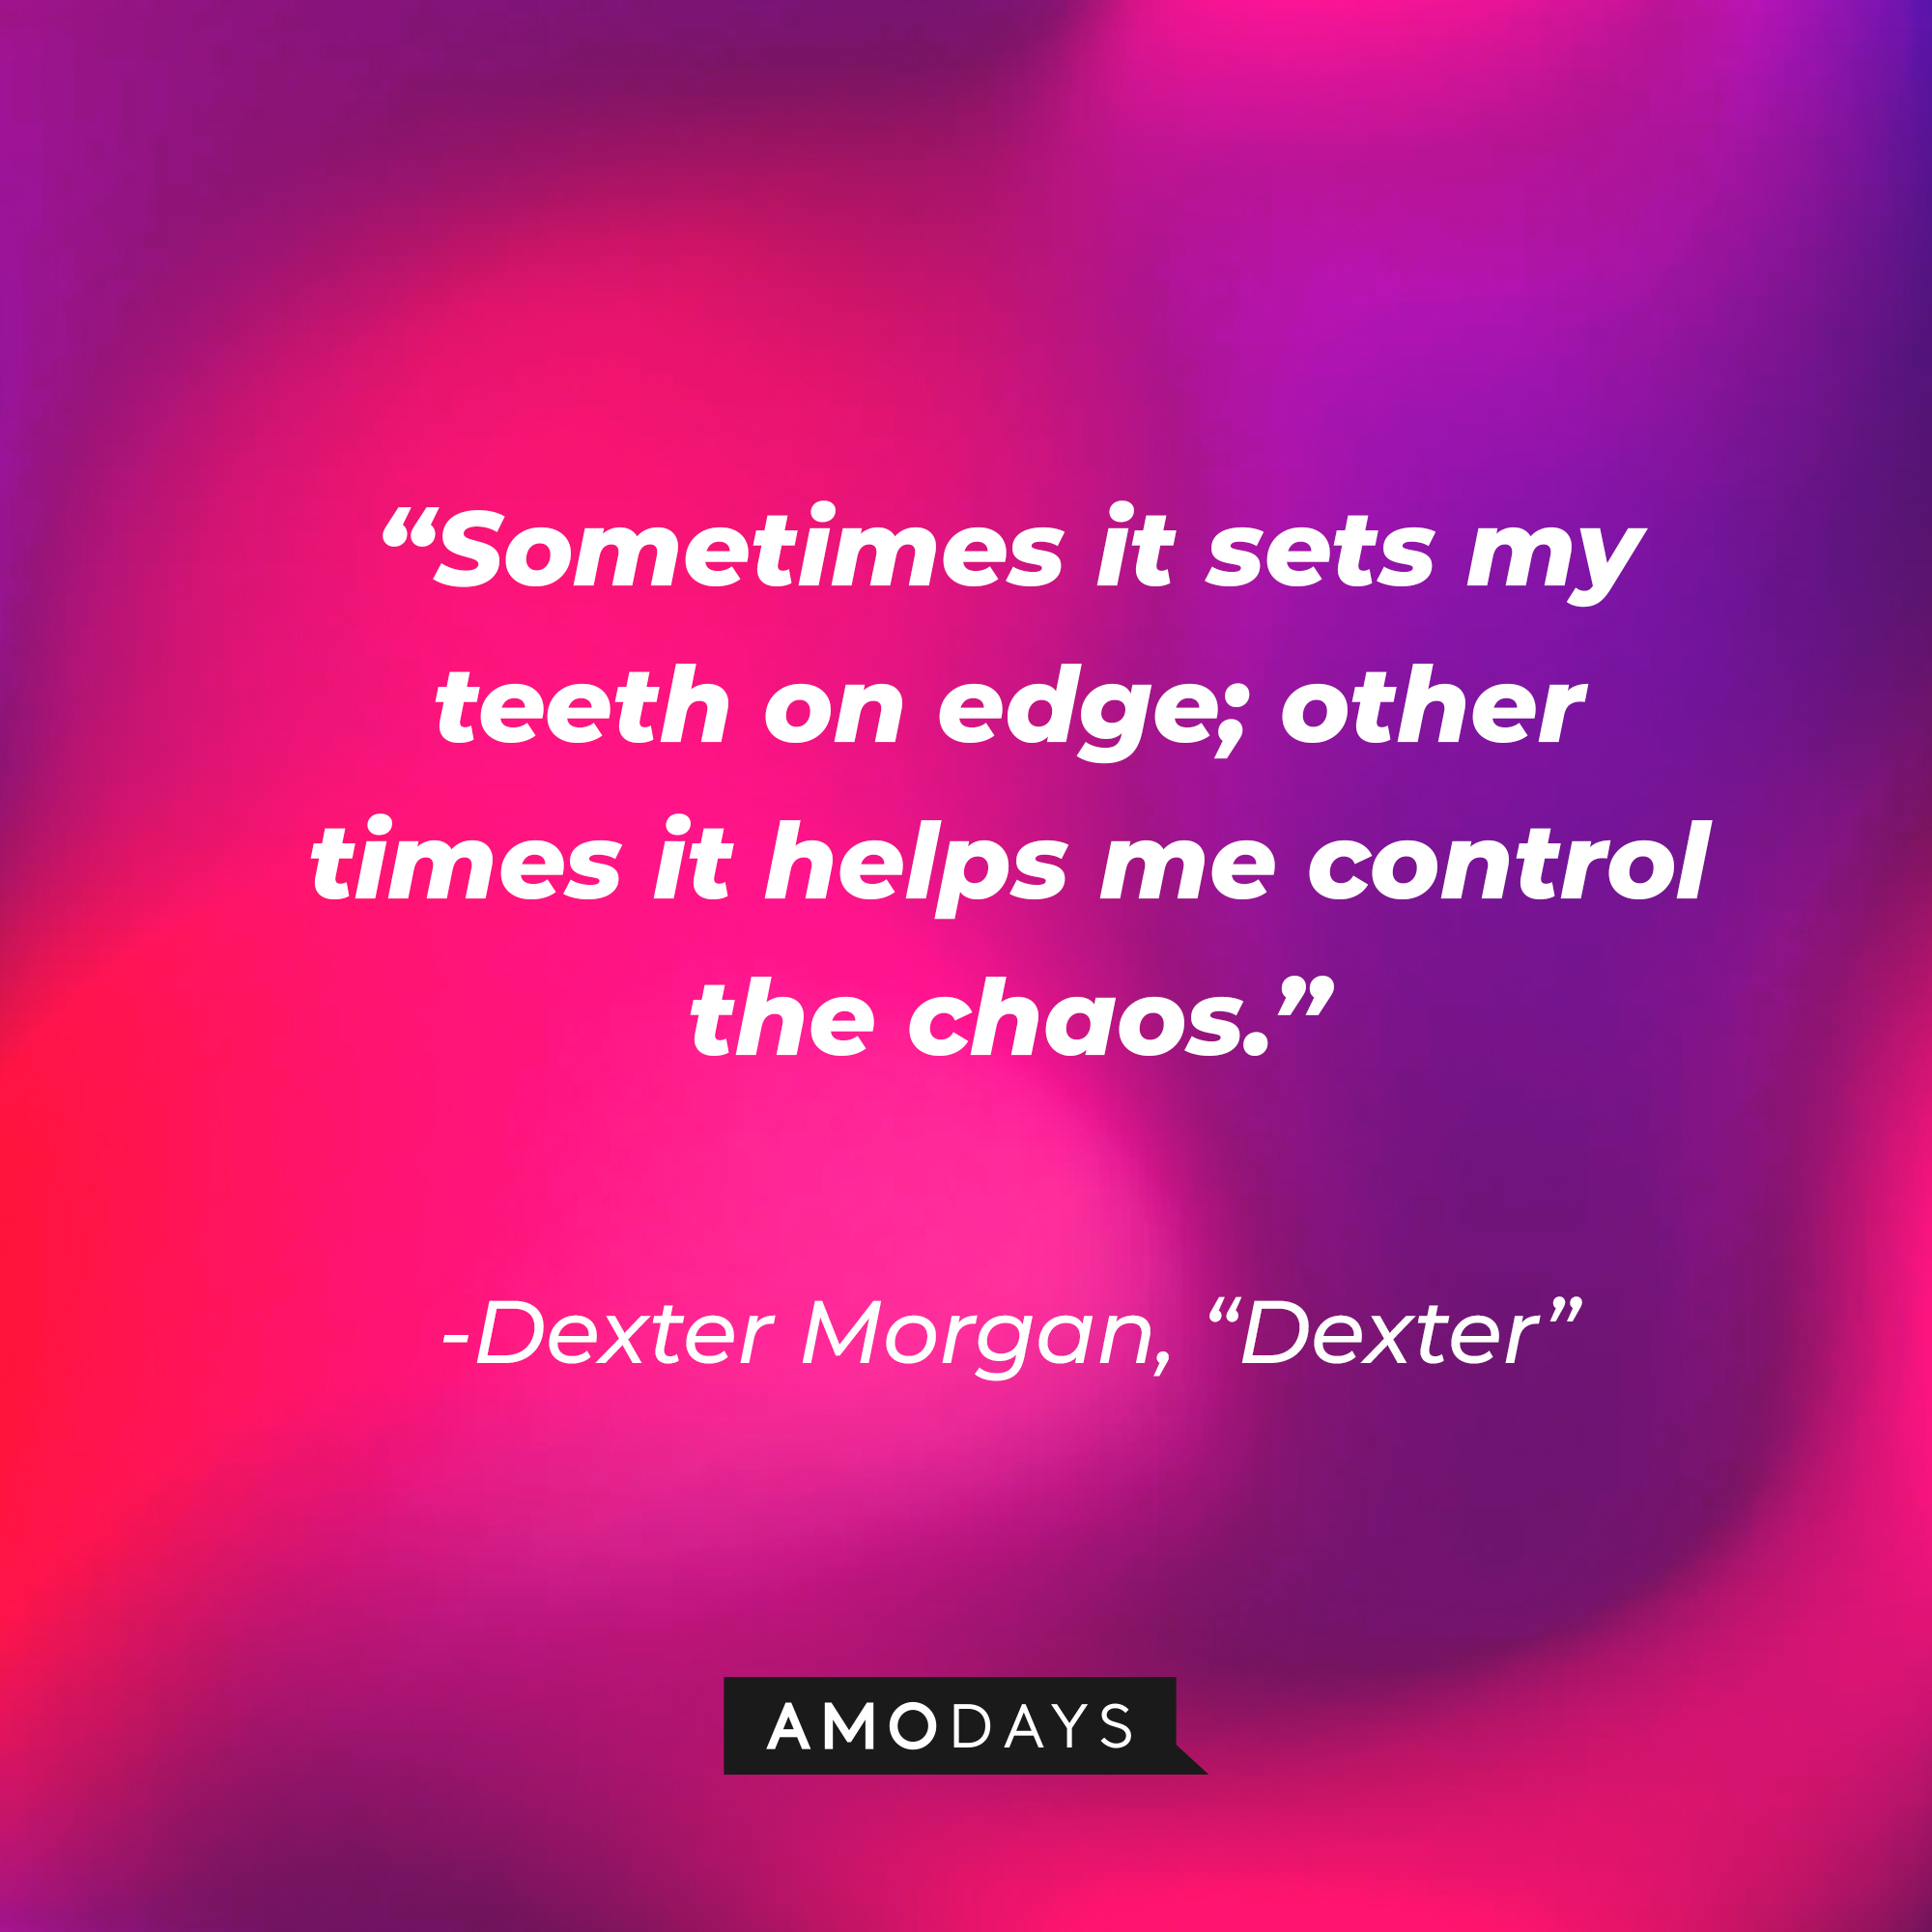 Dexter Morgan's quote from "Dexter:" “Sometimes it sets my teeth on edge; other times it helps me control the chaos.” | Source: AmoDays